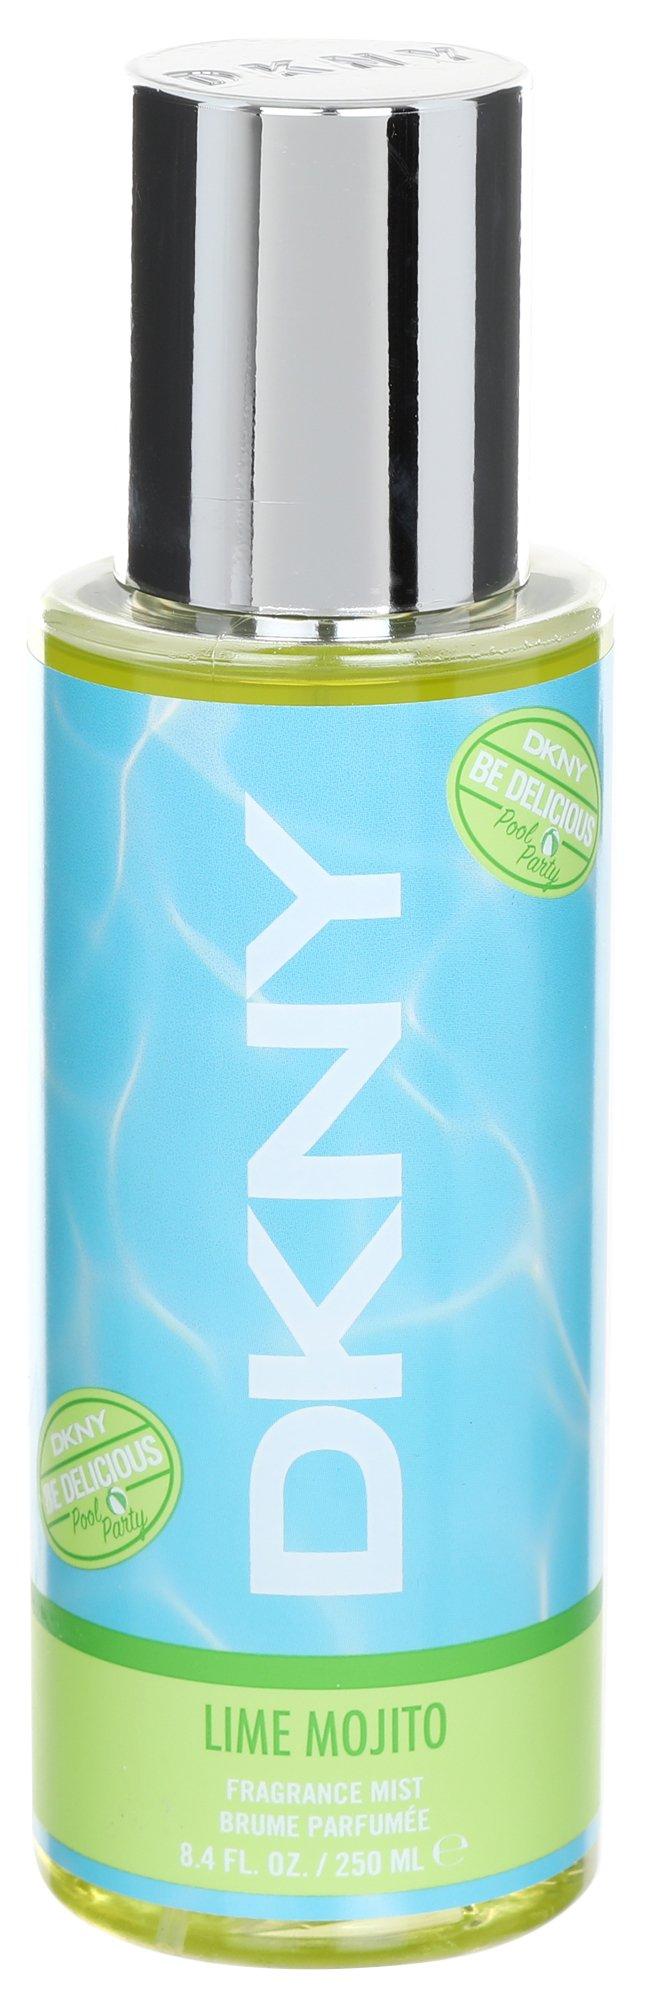 8.4 oz. Lime Mojito Fragrance Mist For Her